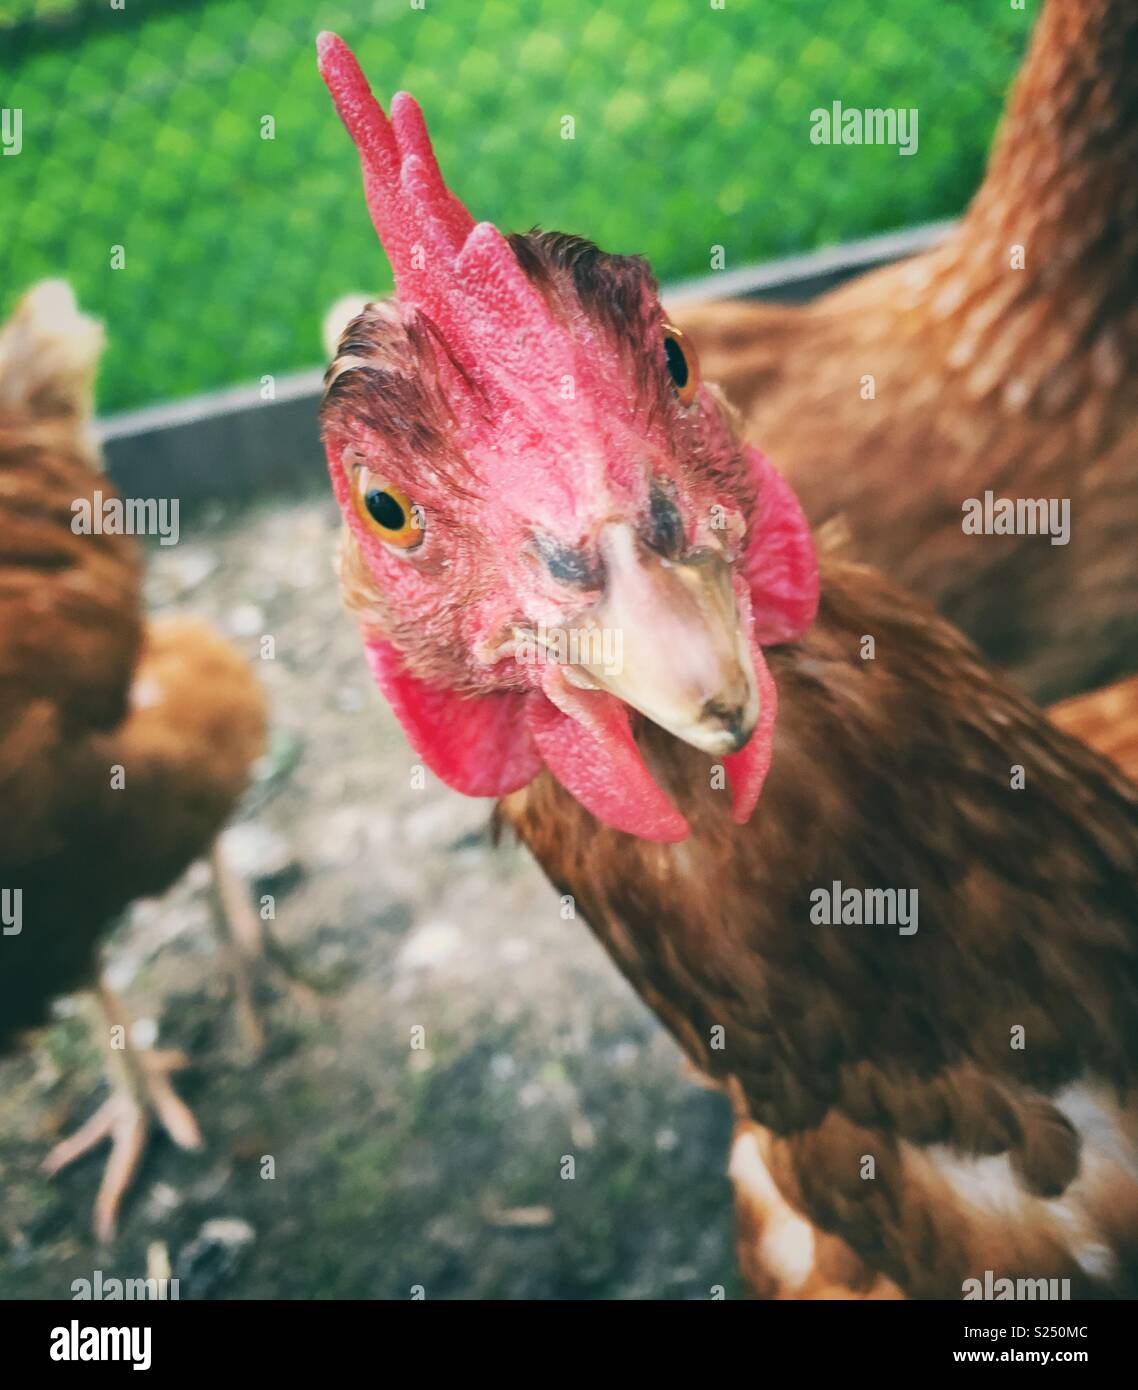 Funny portrait of Rhode Island Red hen looking directly at camera with  chickens and green grass in background Stock Photo - Alamy